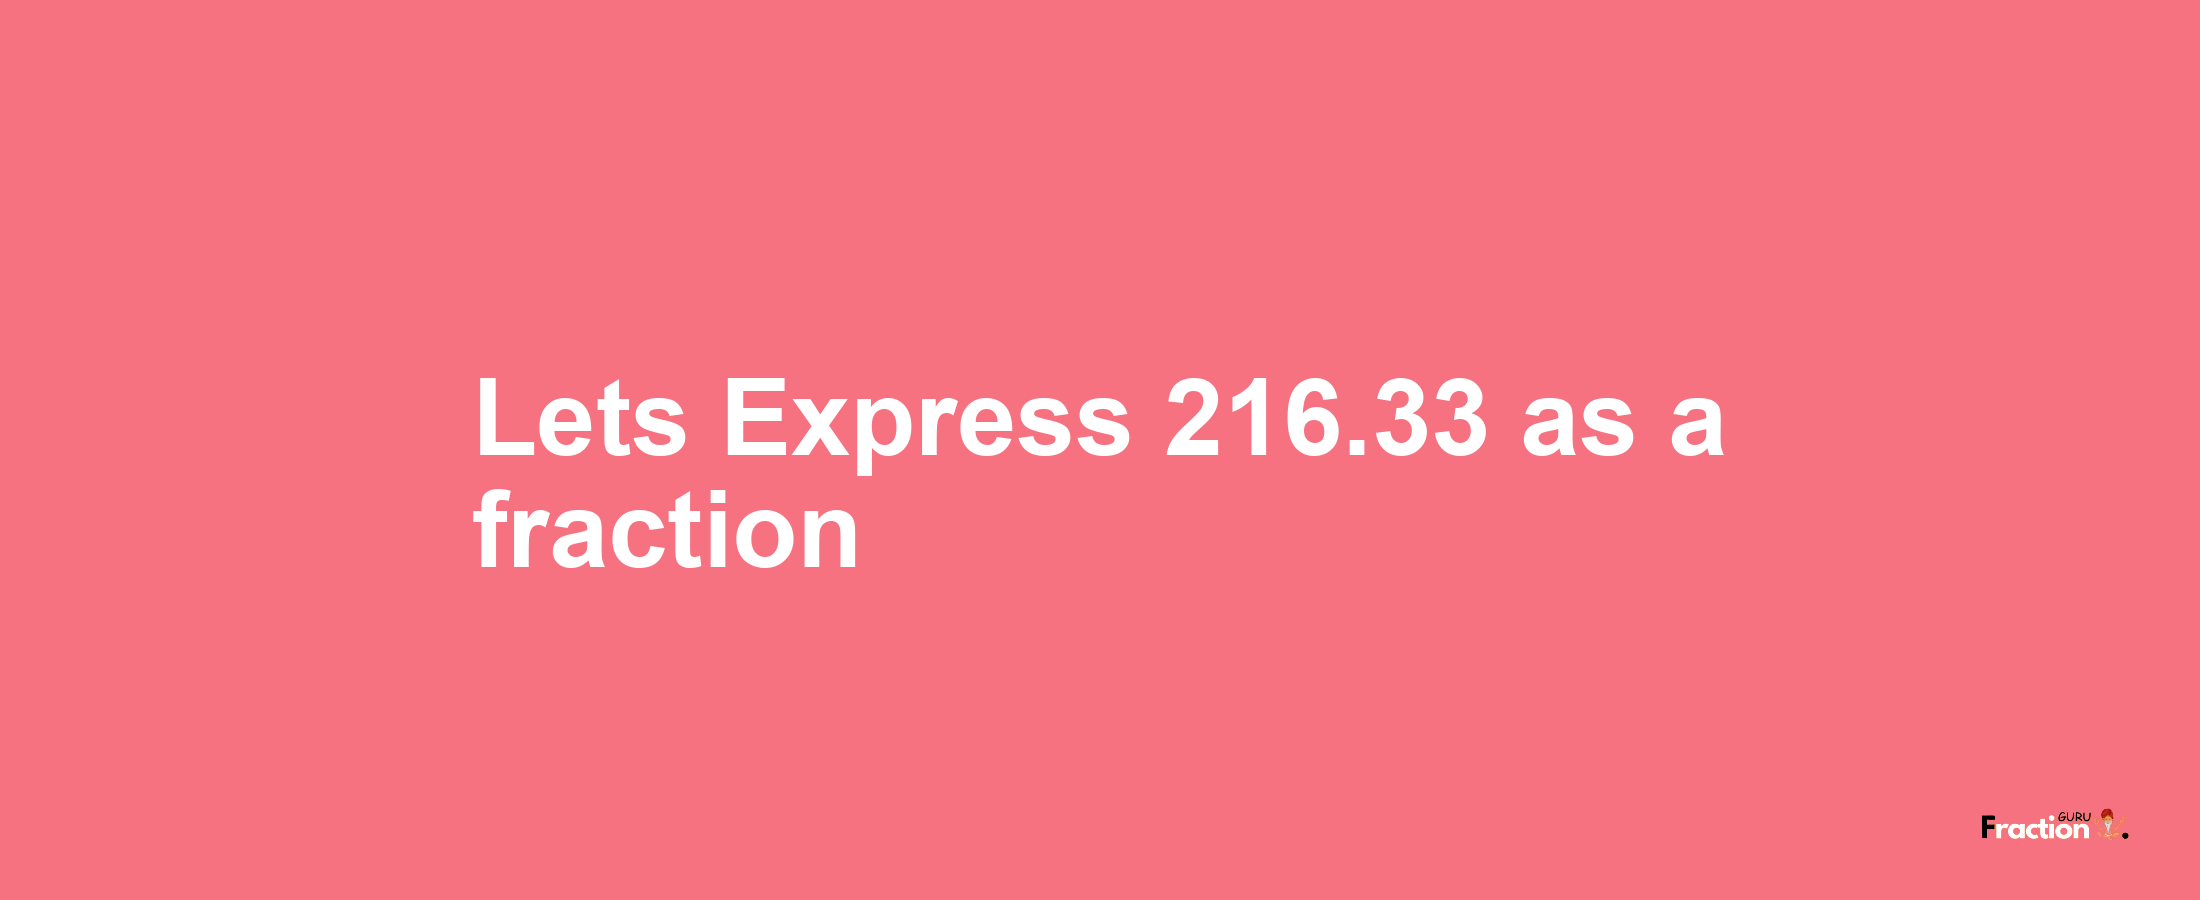 Lets Express 216.33 as afraction